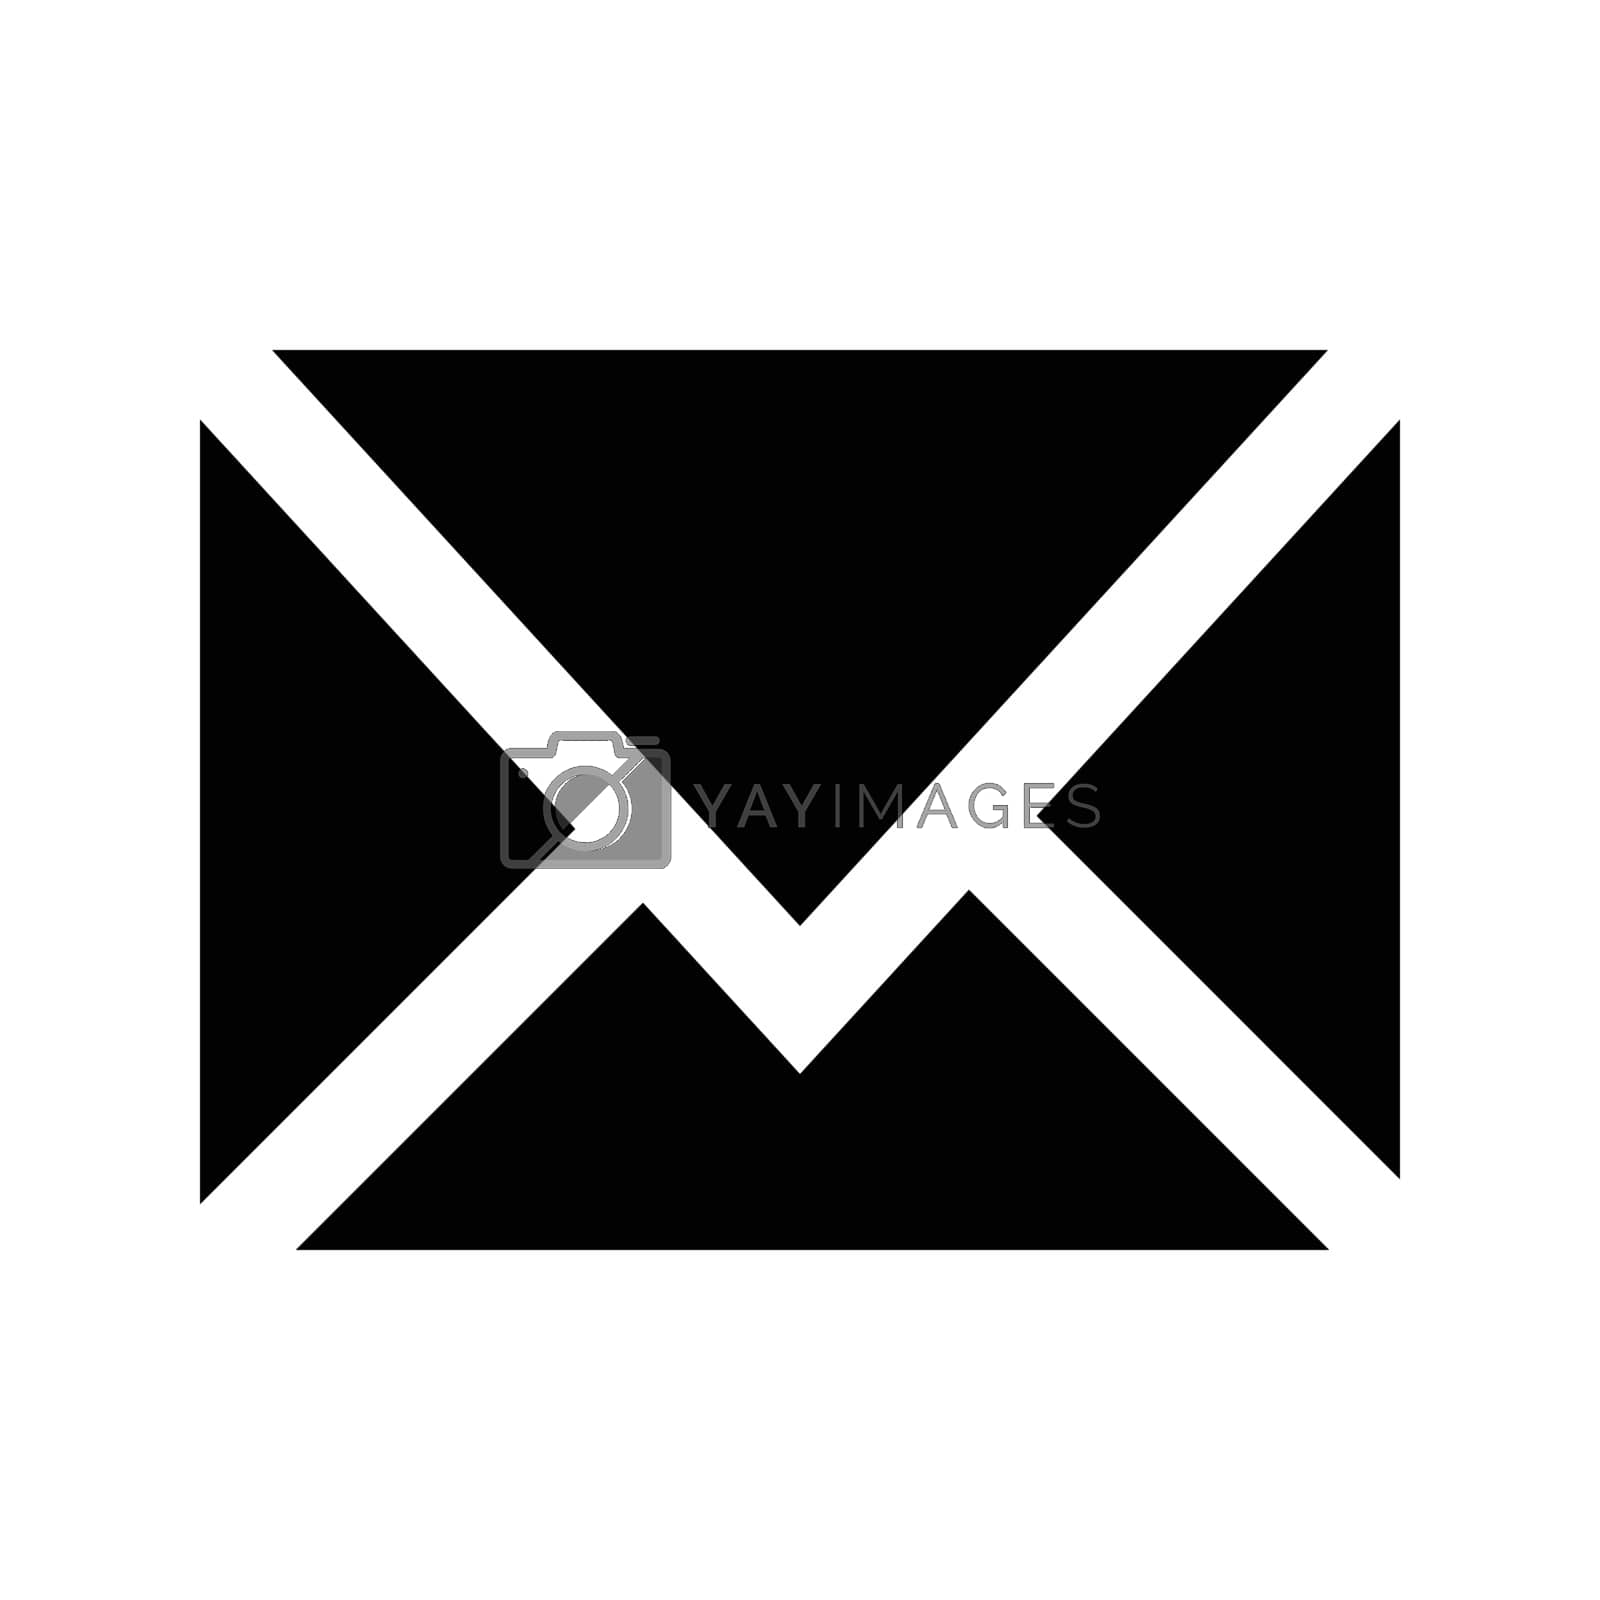 Royalty free image of email by vectorstall